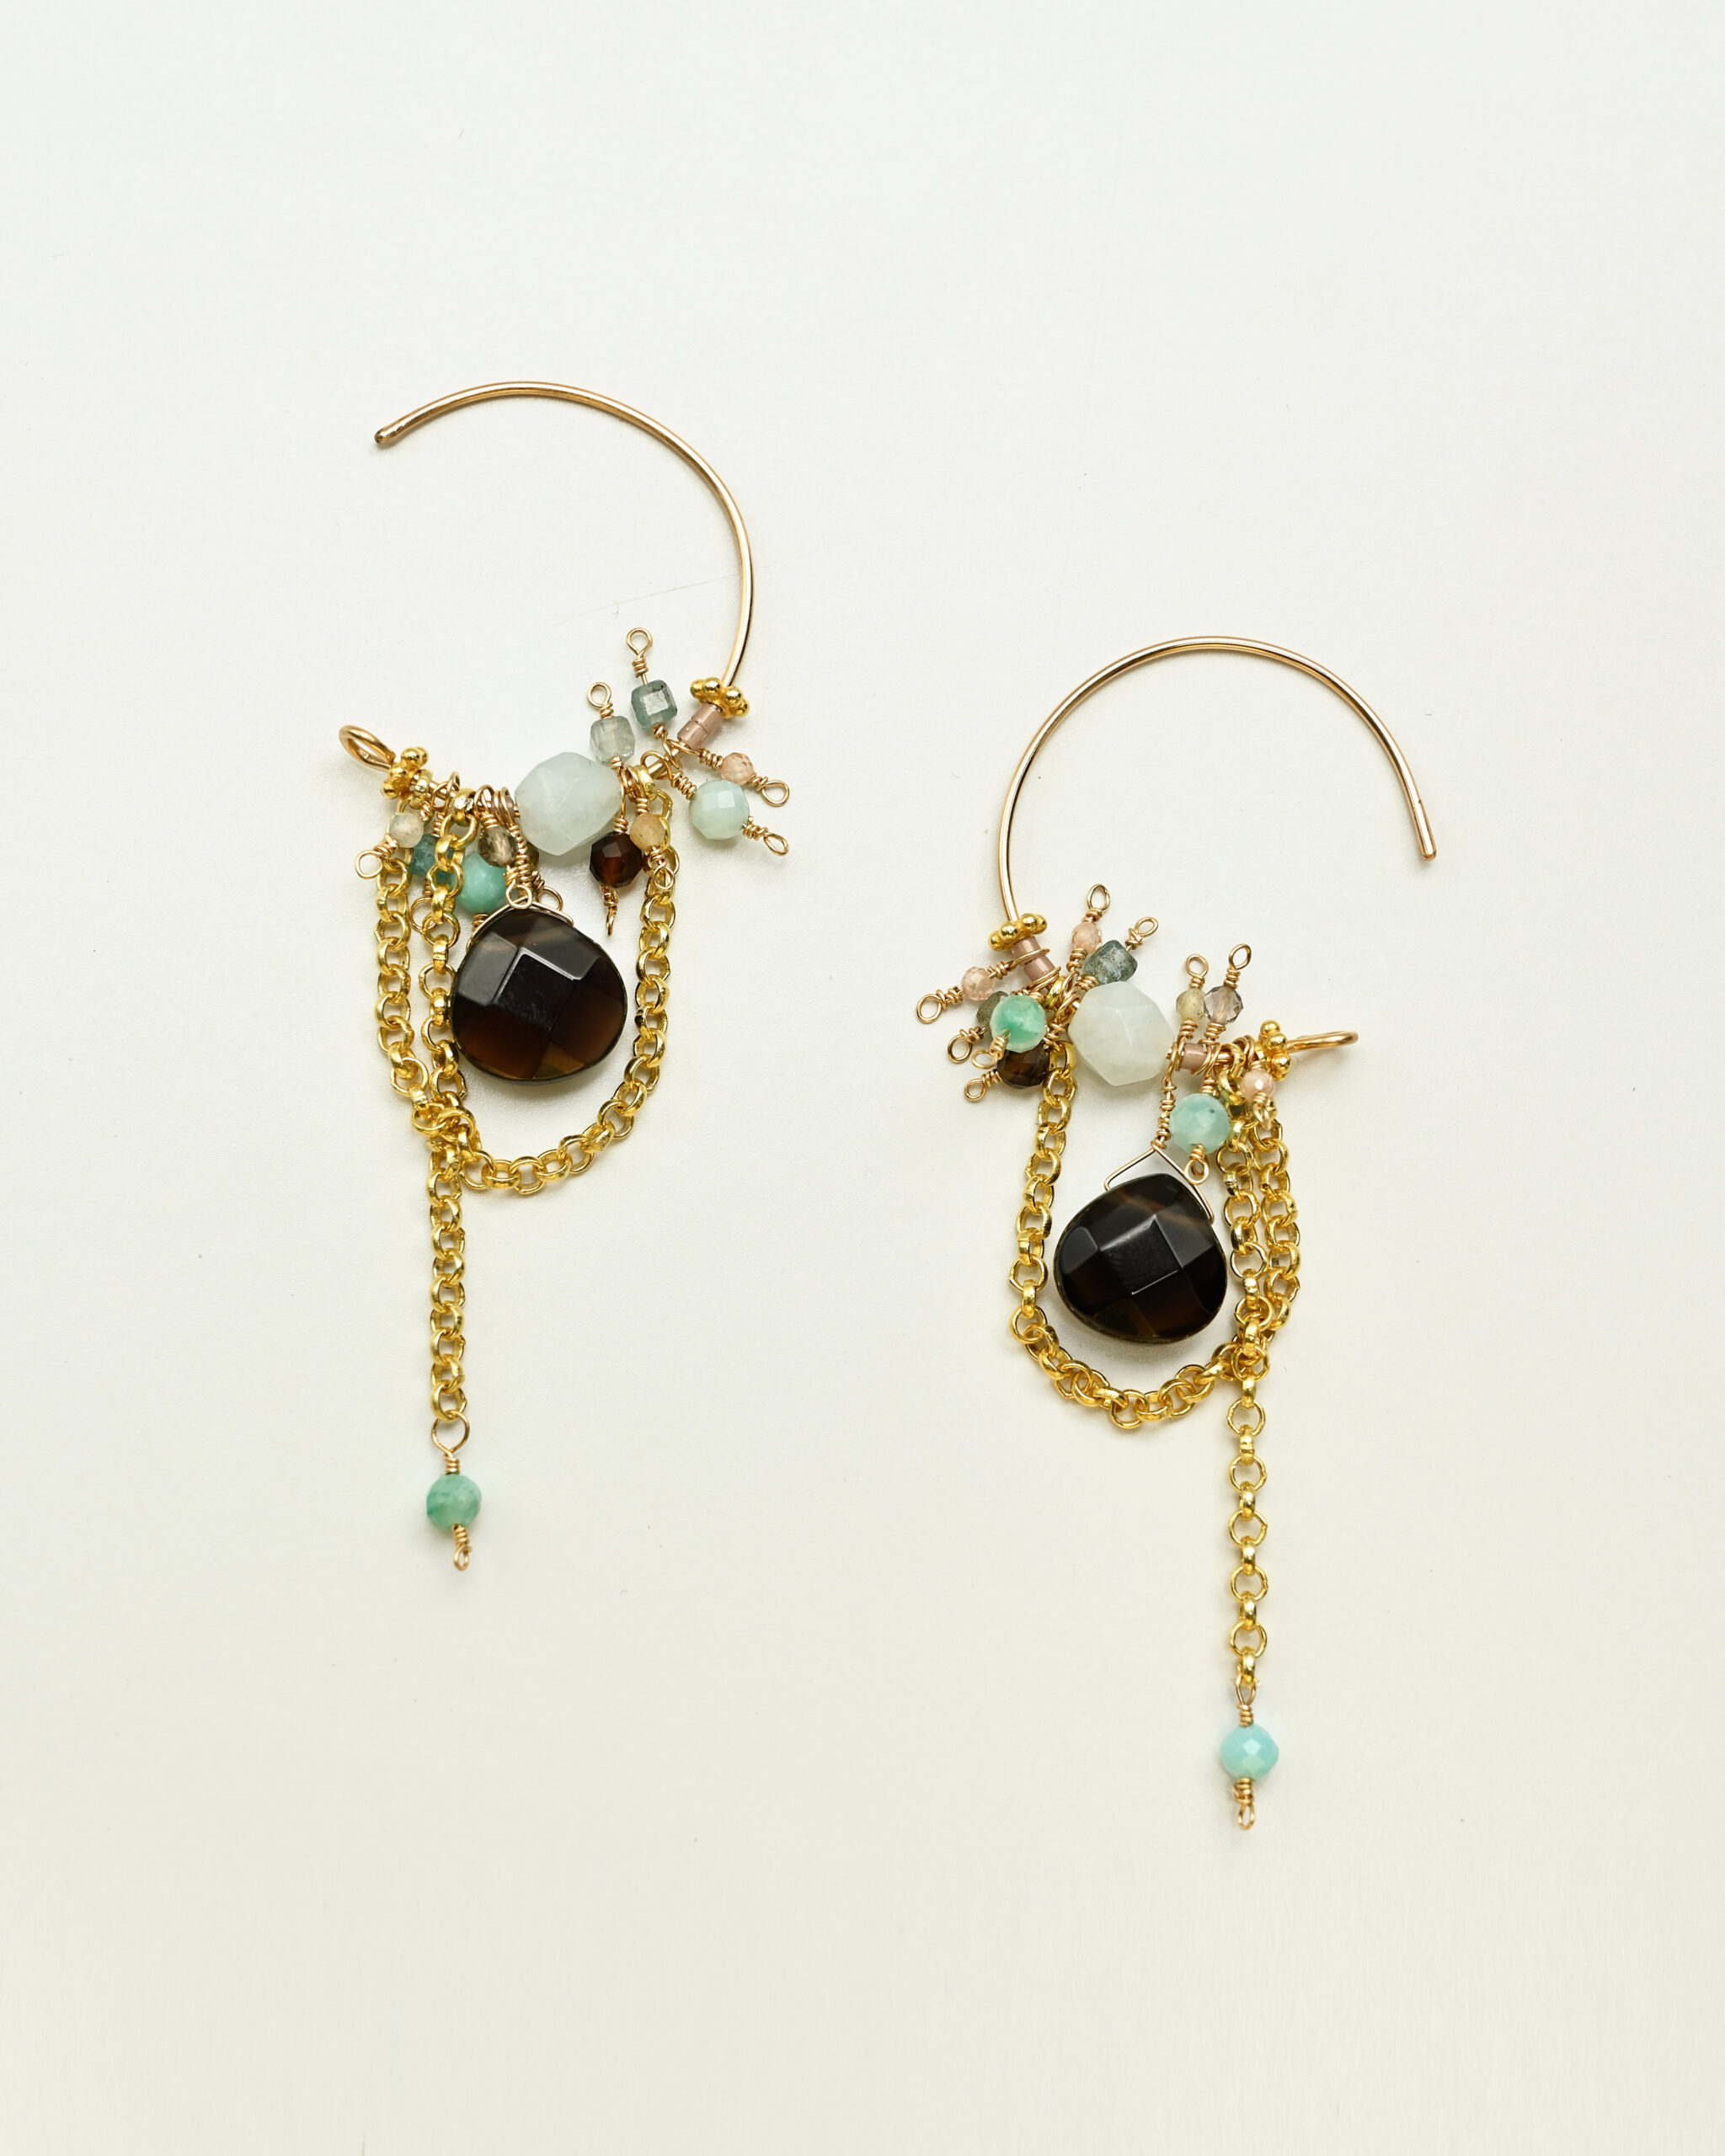 14k gold filled drop earrings with smoky quartz, agate, moonstone, amazonite, fluorite and 18k gold plated chains